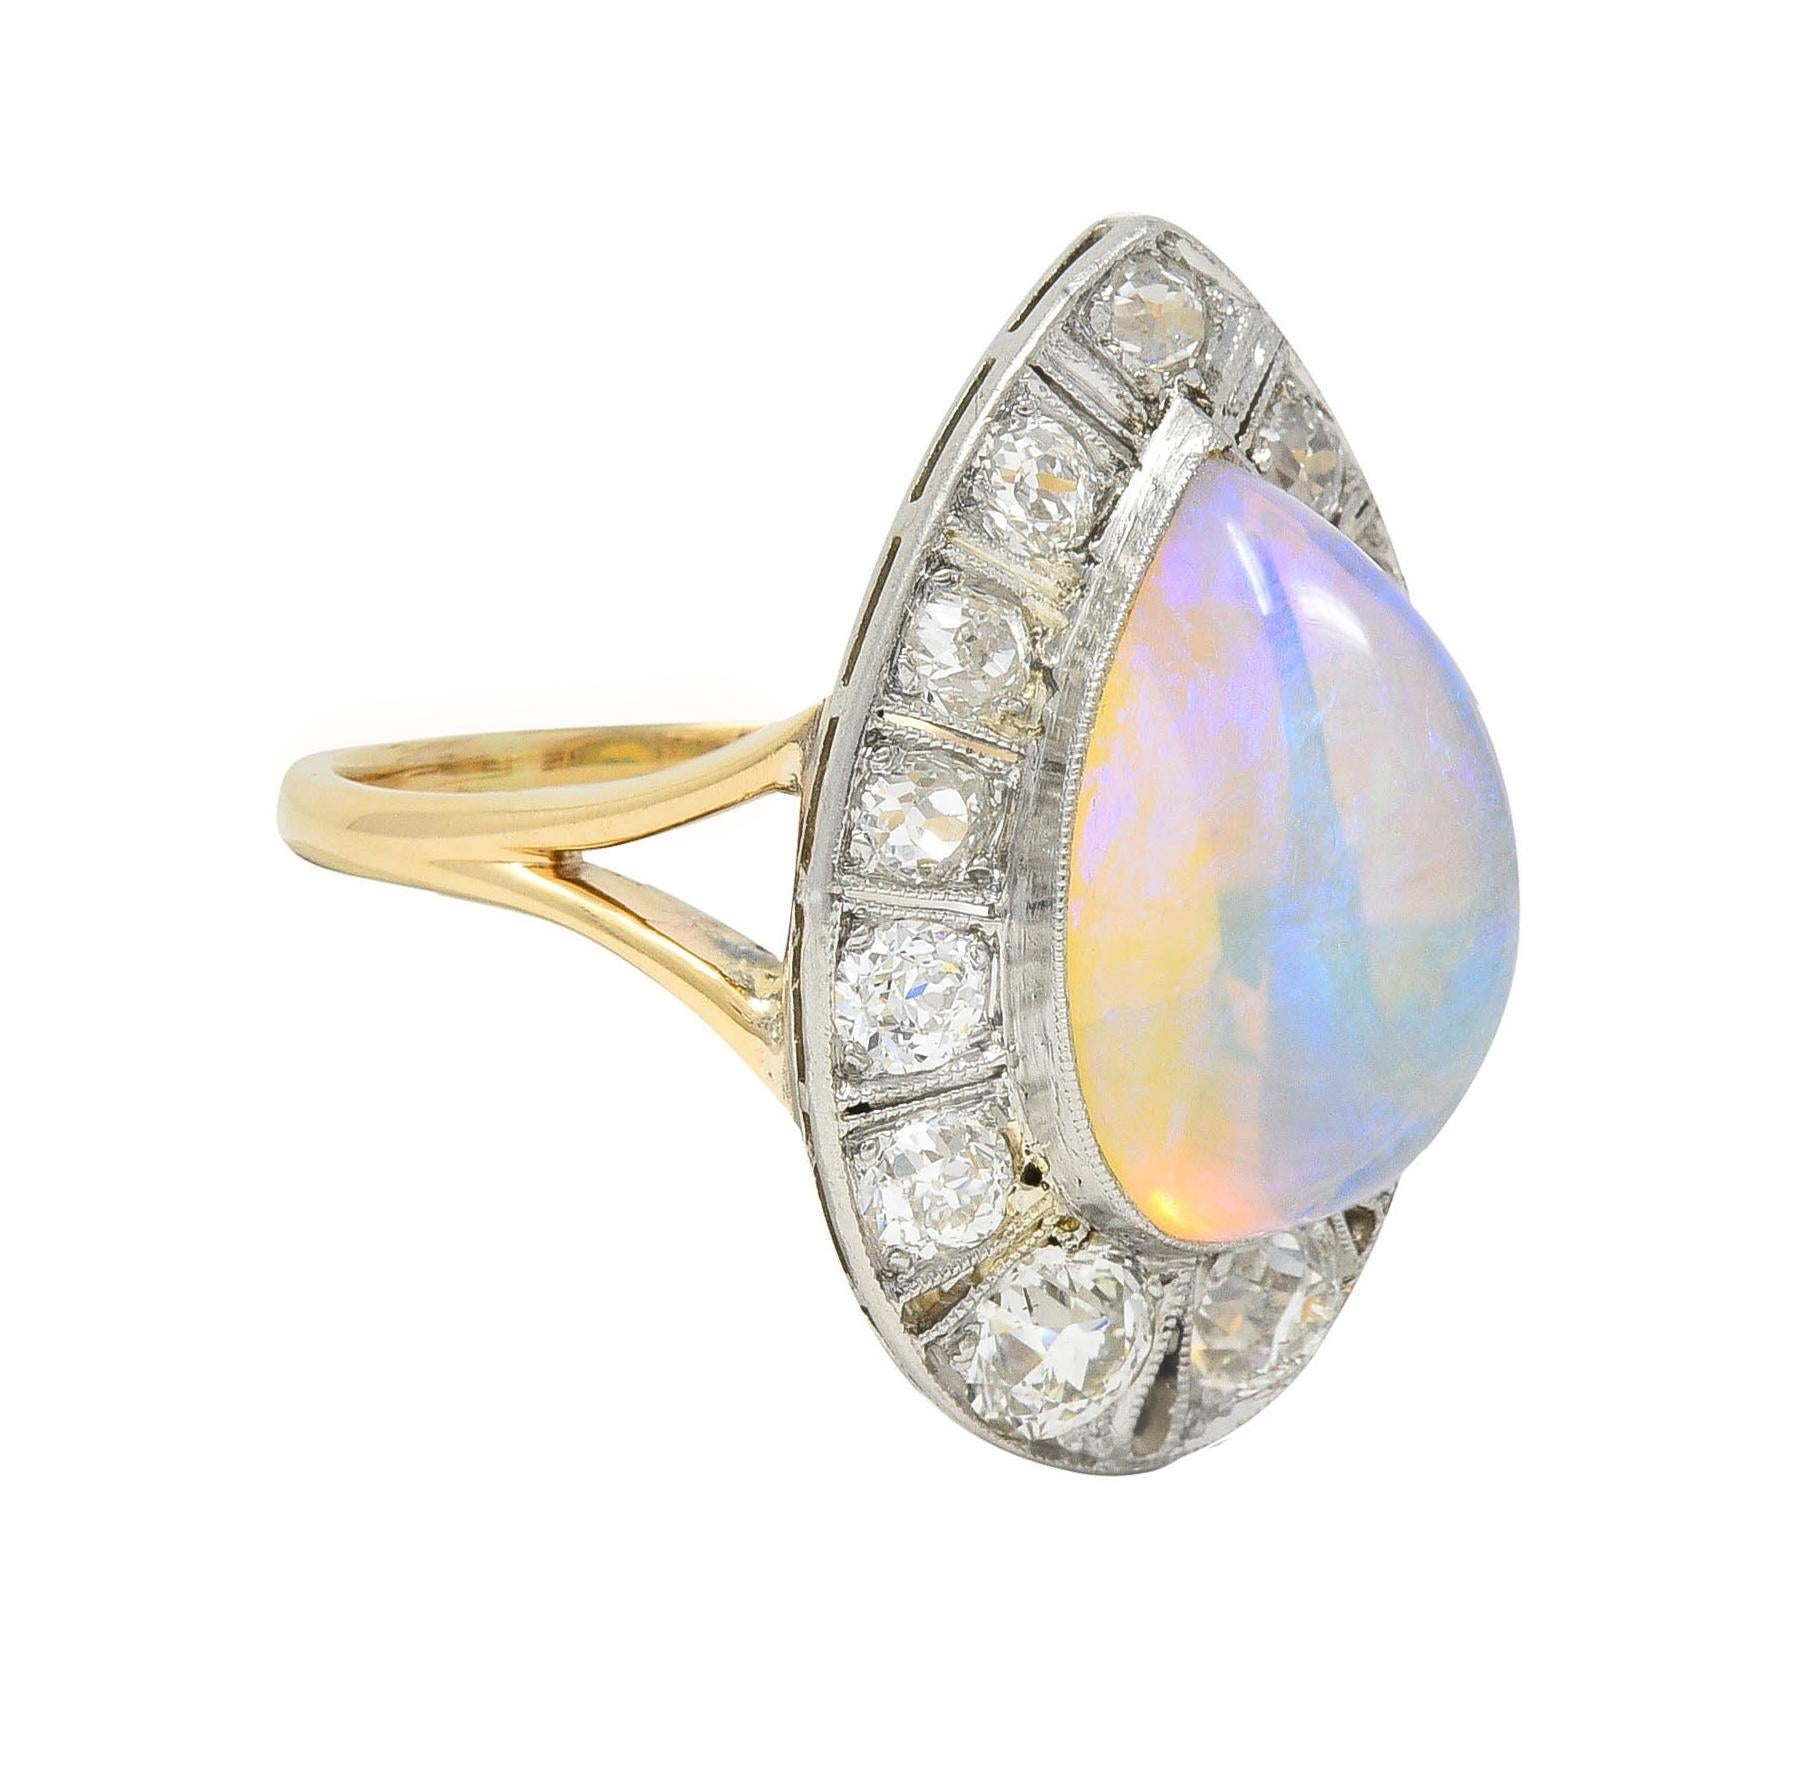 Centering a pear-shaped jelly opal cabochon measuring 8.0 x 13.0 mm 
Translucent colorless body with violet and yellow play-of-color
Set with a platinum bezel with a pierced halo surround 
Bead set with old European cut diamonds 
Weighing